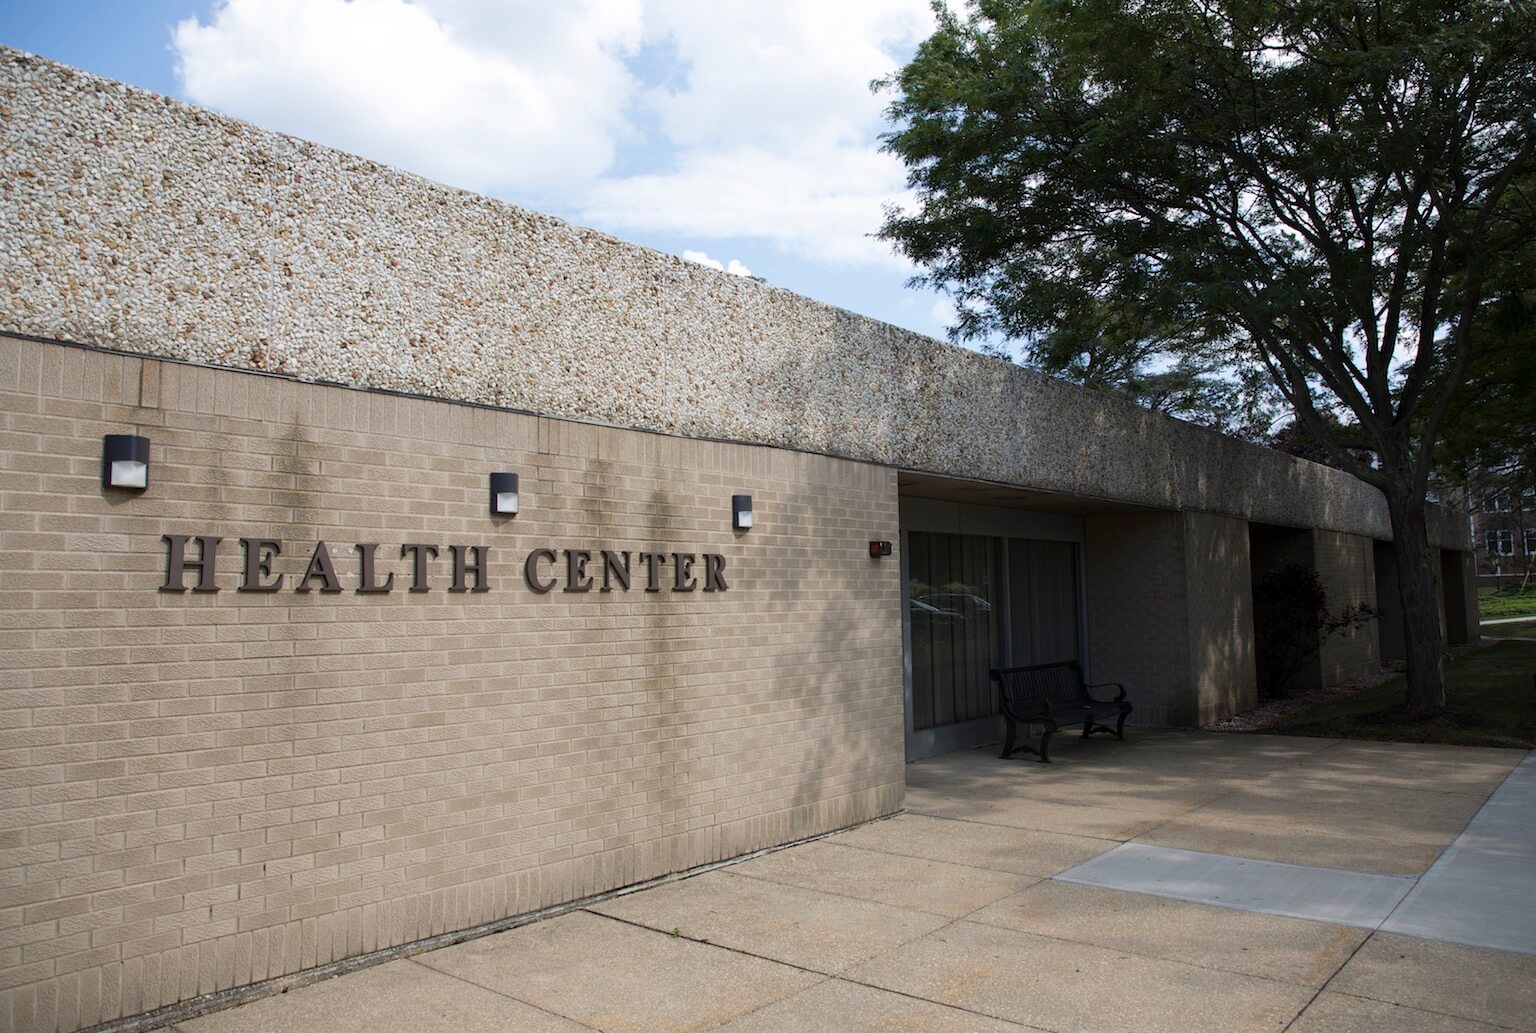 Photo of the entrance to the Health Center